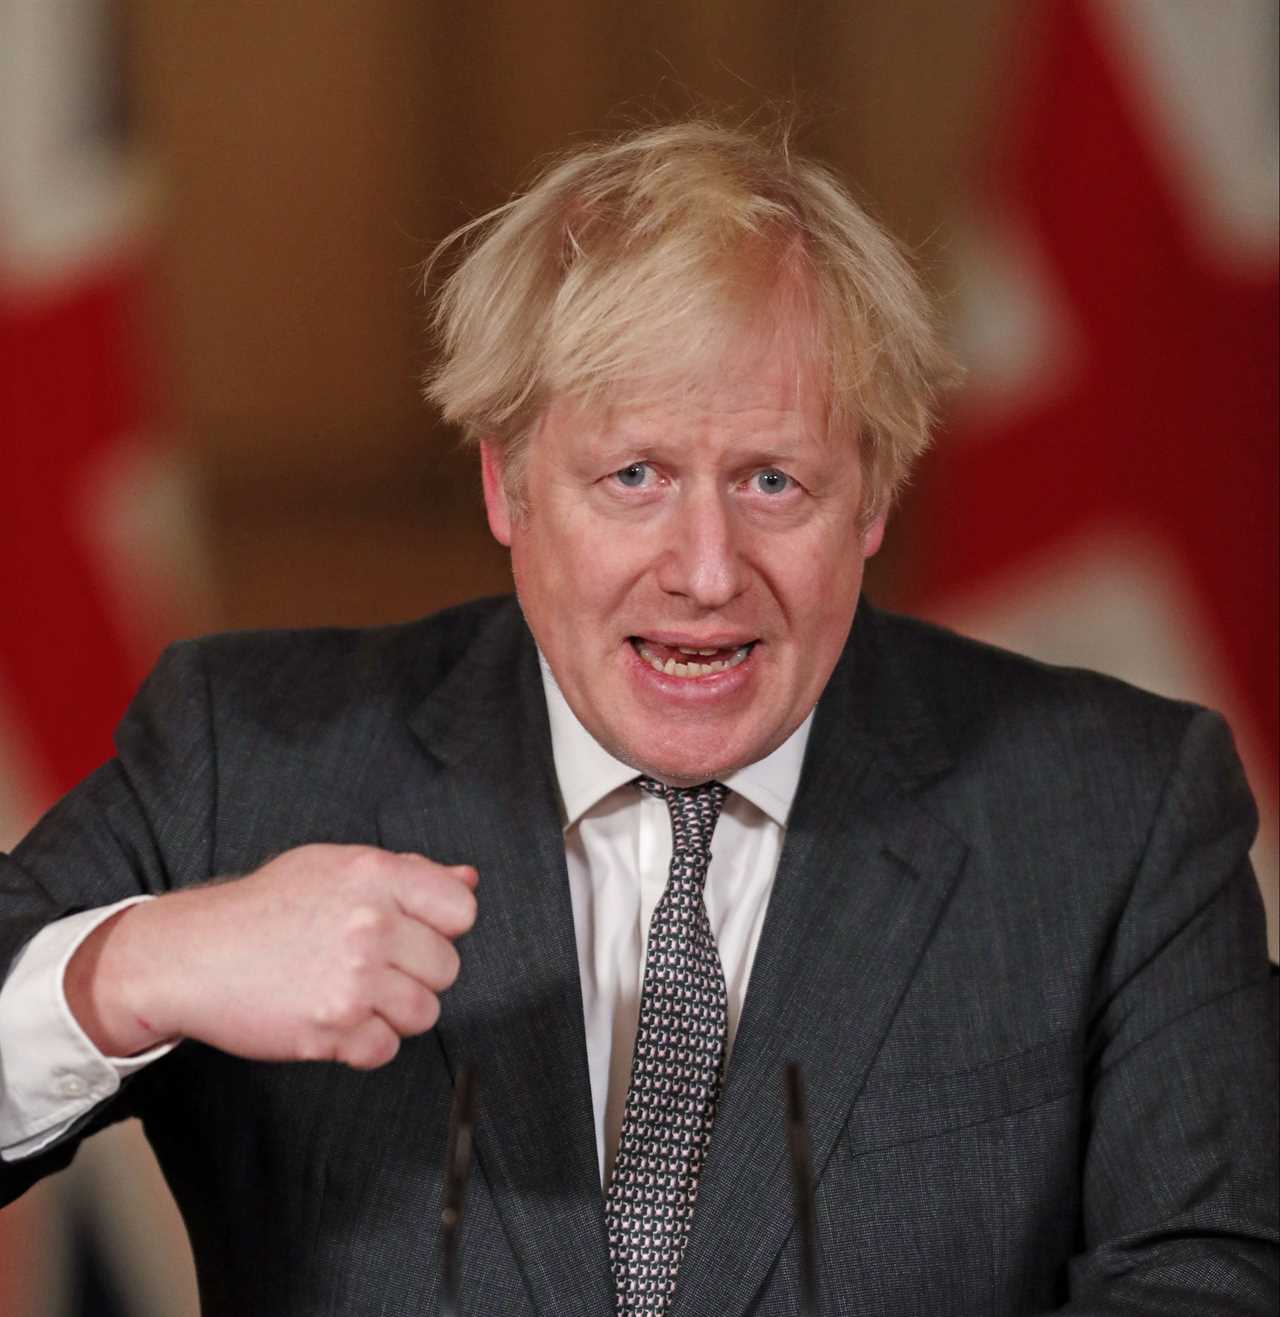 Boris Johnson insists Christmas parties can go ahead despite ministers saying the opposite